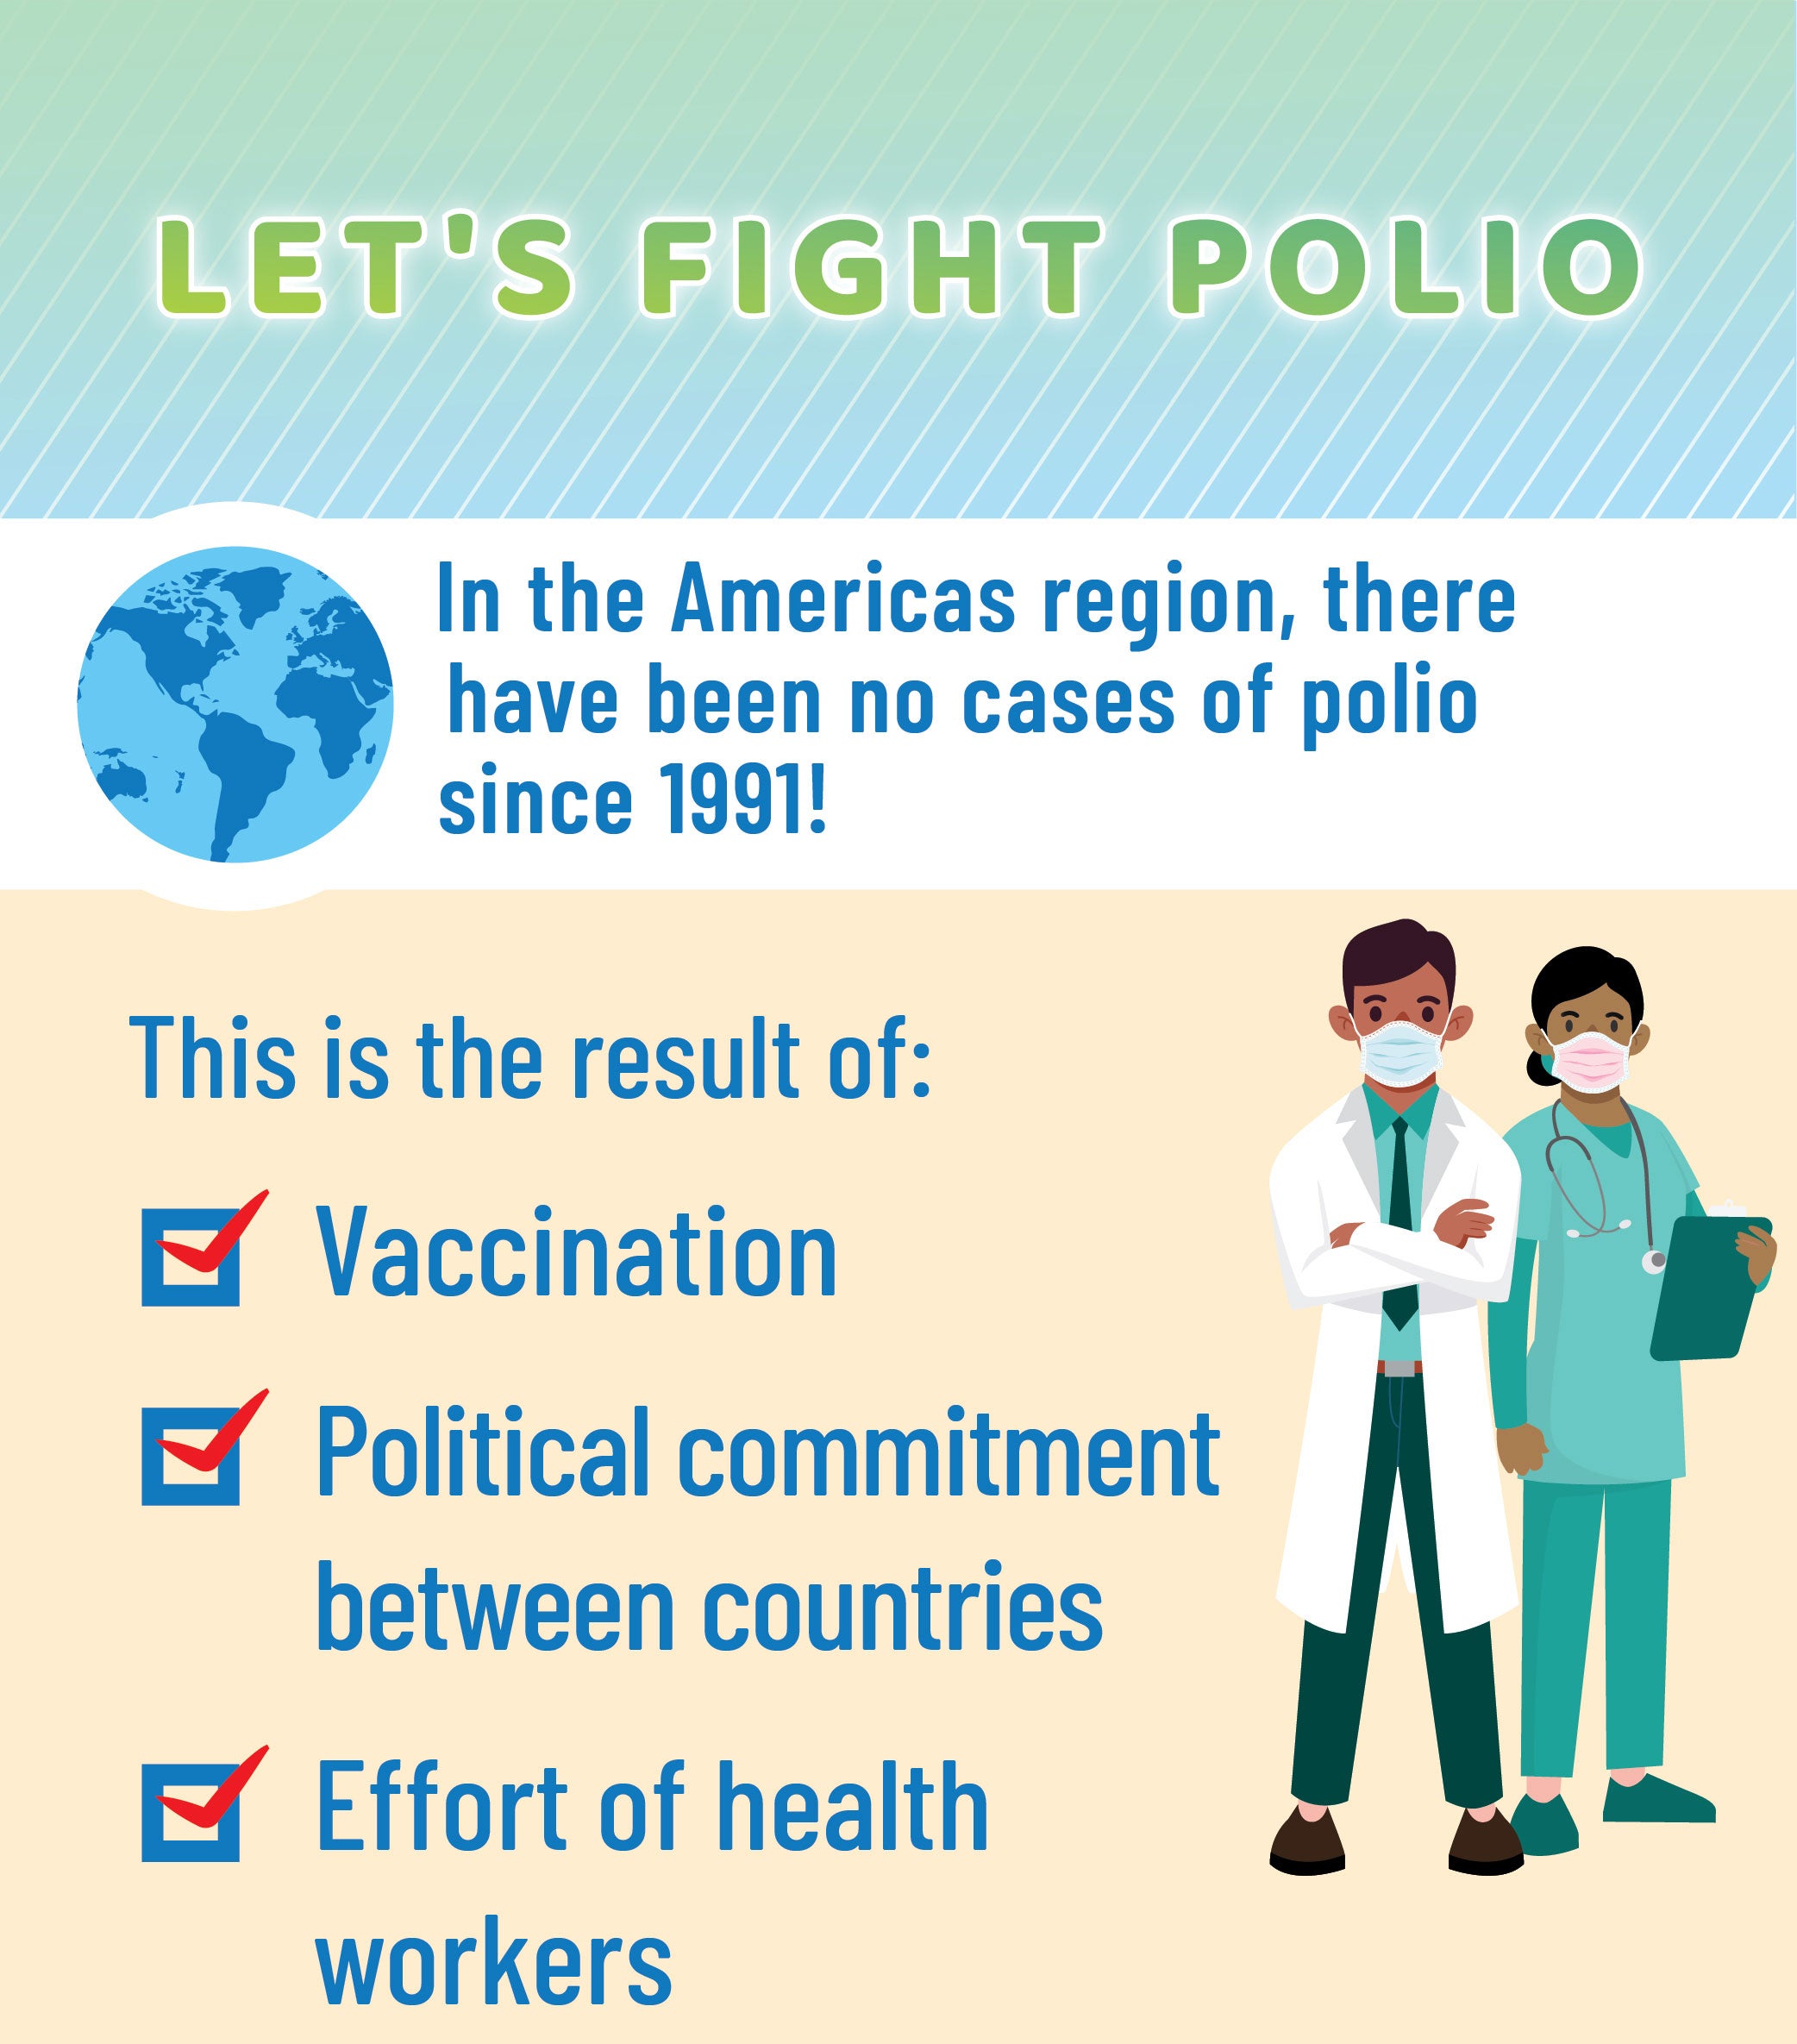 in the Americas region, there have been no cases of polio since 1991